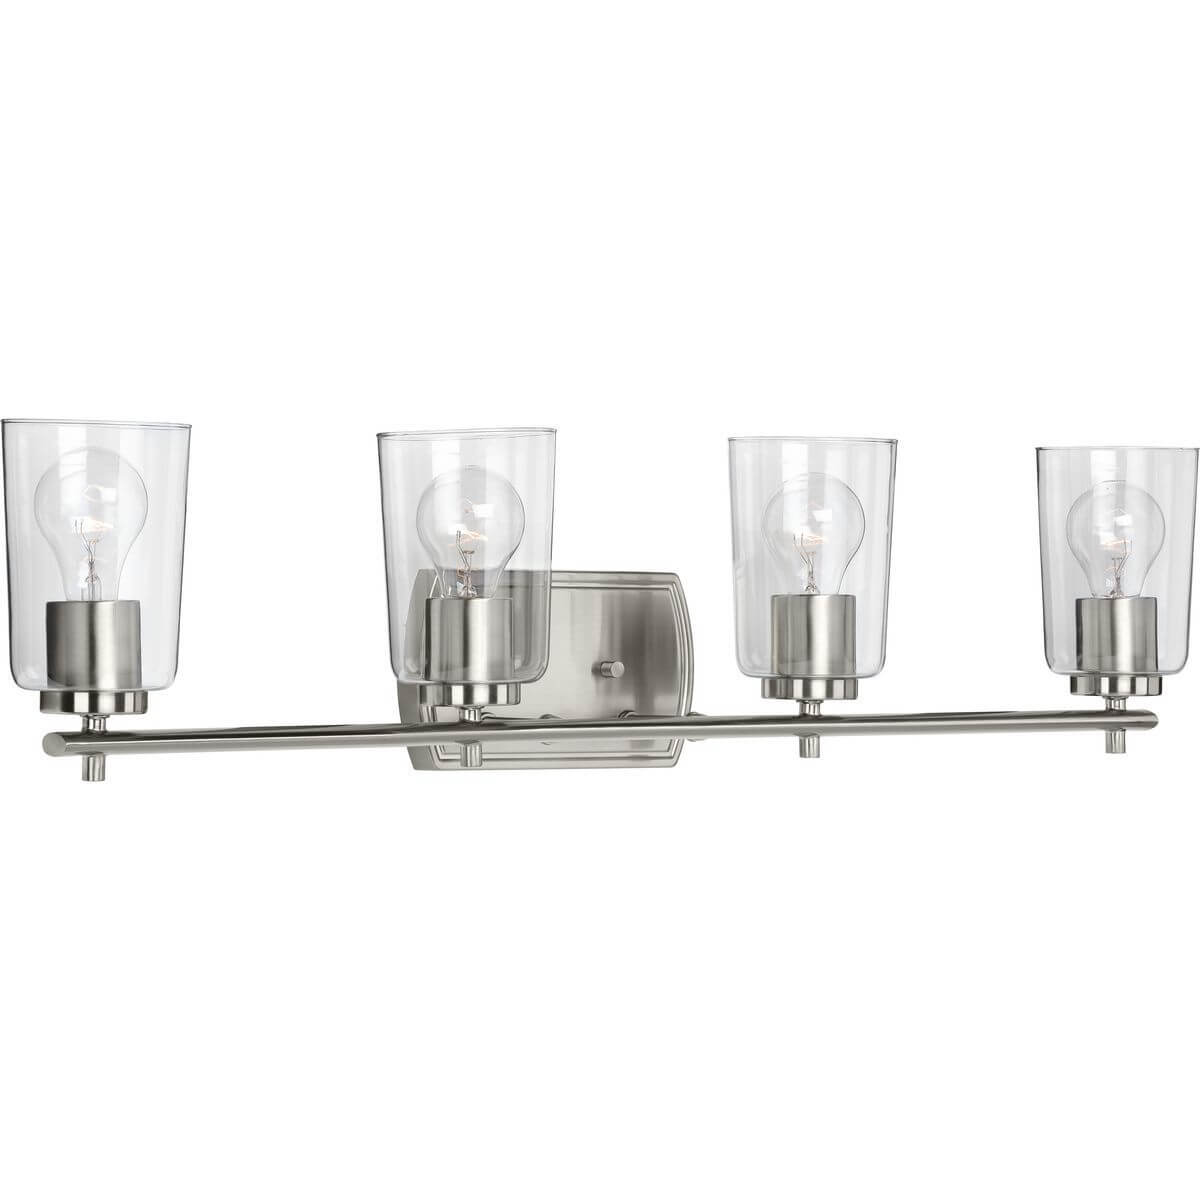 Progress Lighting Adley 4 Light 32 inch Bath Vanity Light in Brushed Nickel with Clear Glass P300157-009